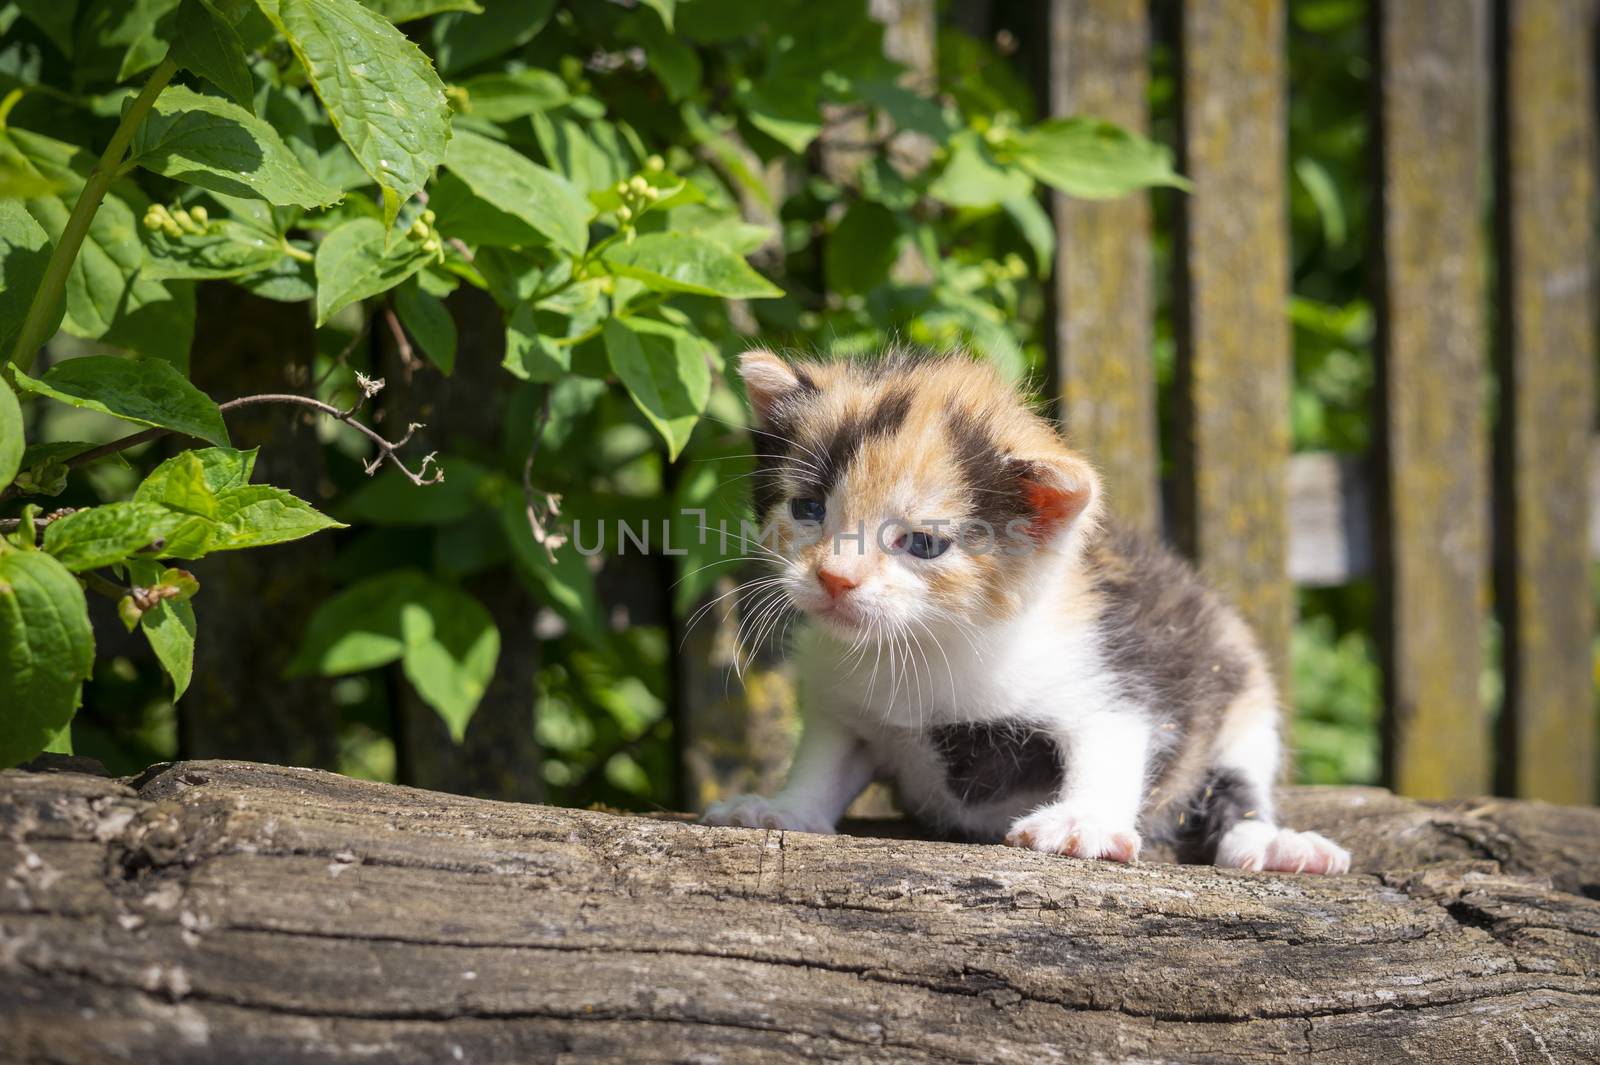 Little kitten crouching on a tree stump against a rustic weathered wooden fence in a low angle view